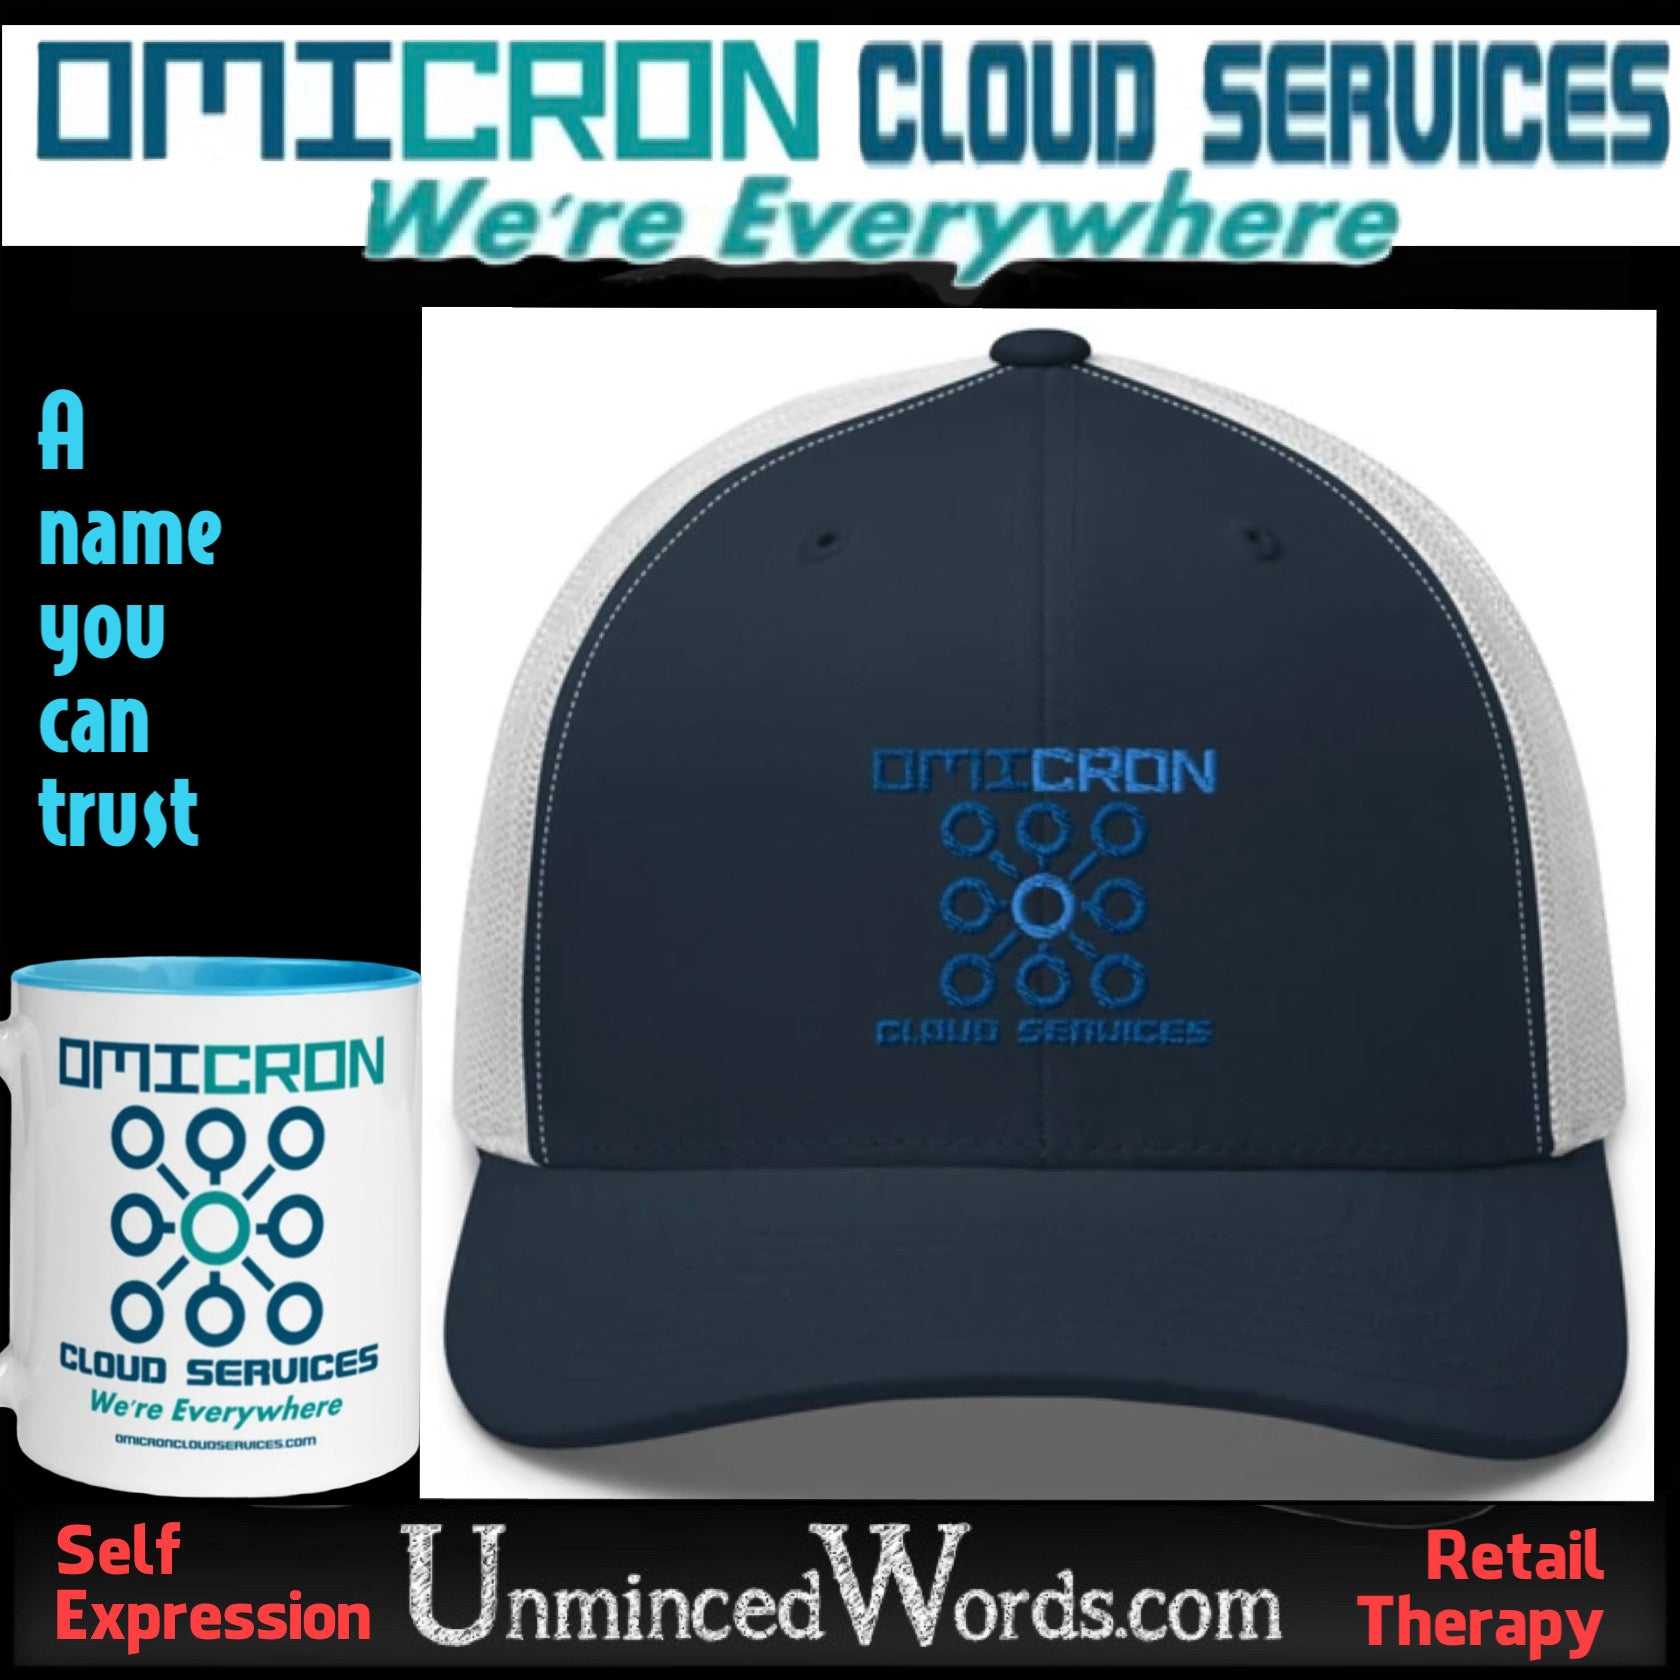 Omicron Cloud Services is here for you